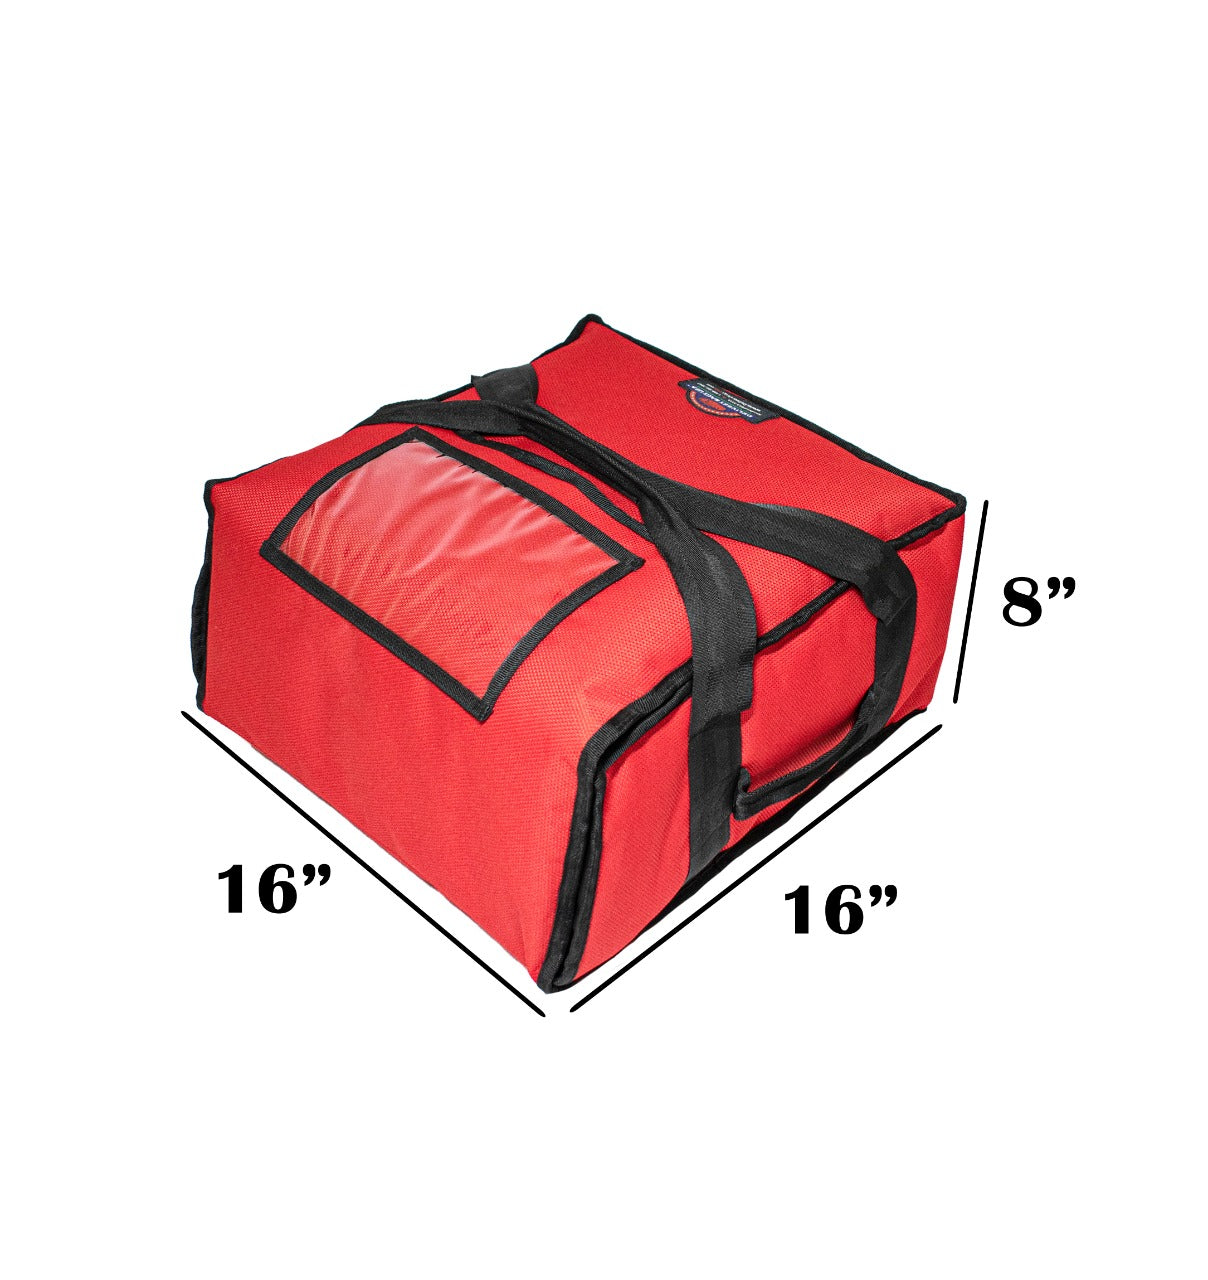 PB33-1214-RED 12" - 14" Pizza Delivery Bag (Red) UPC: 850024511002